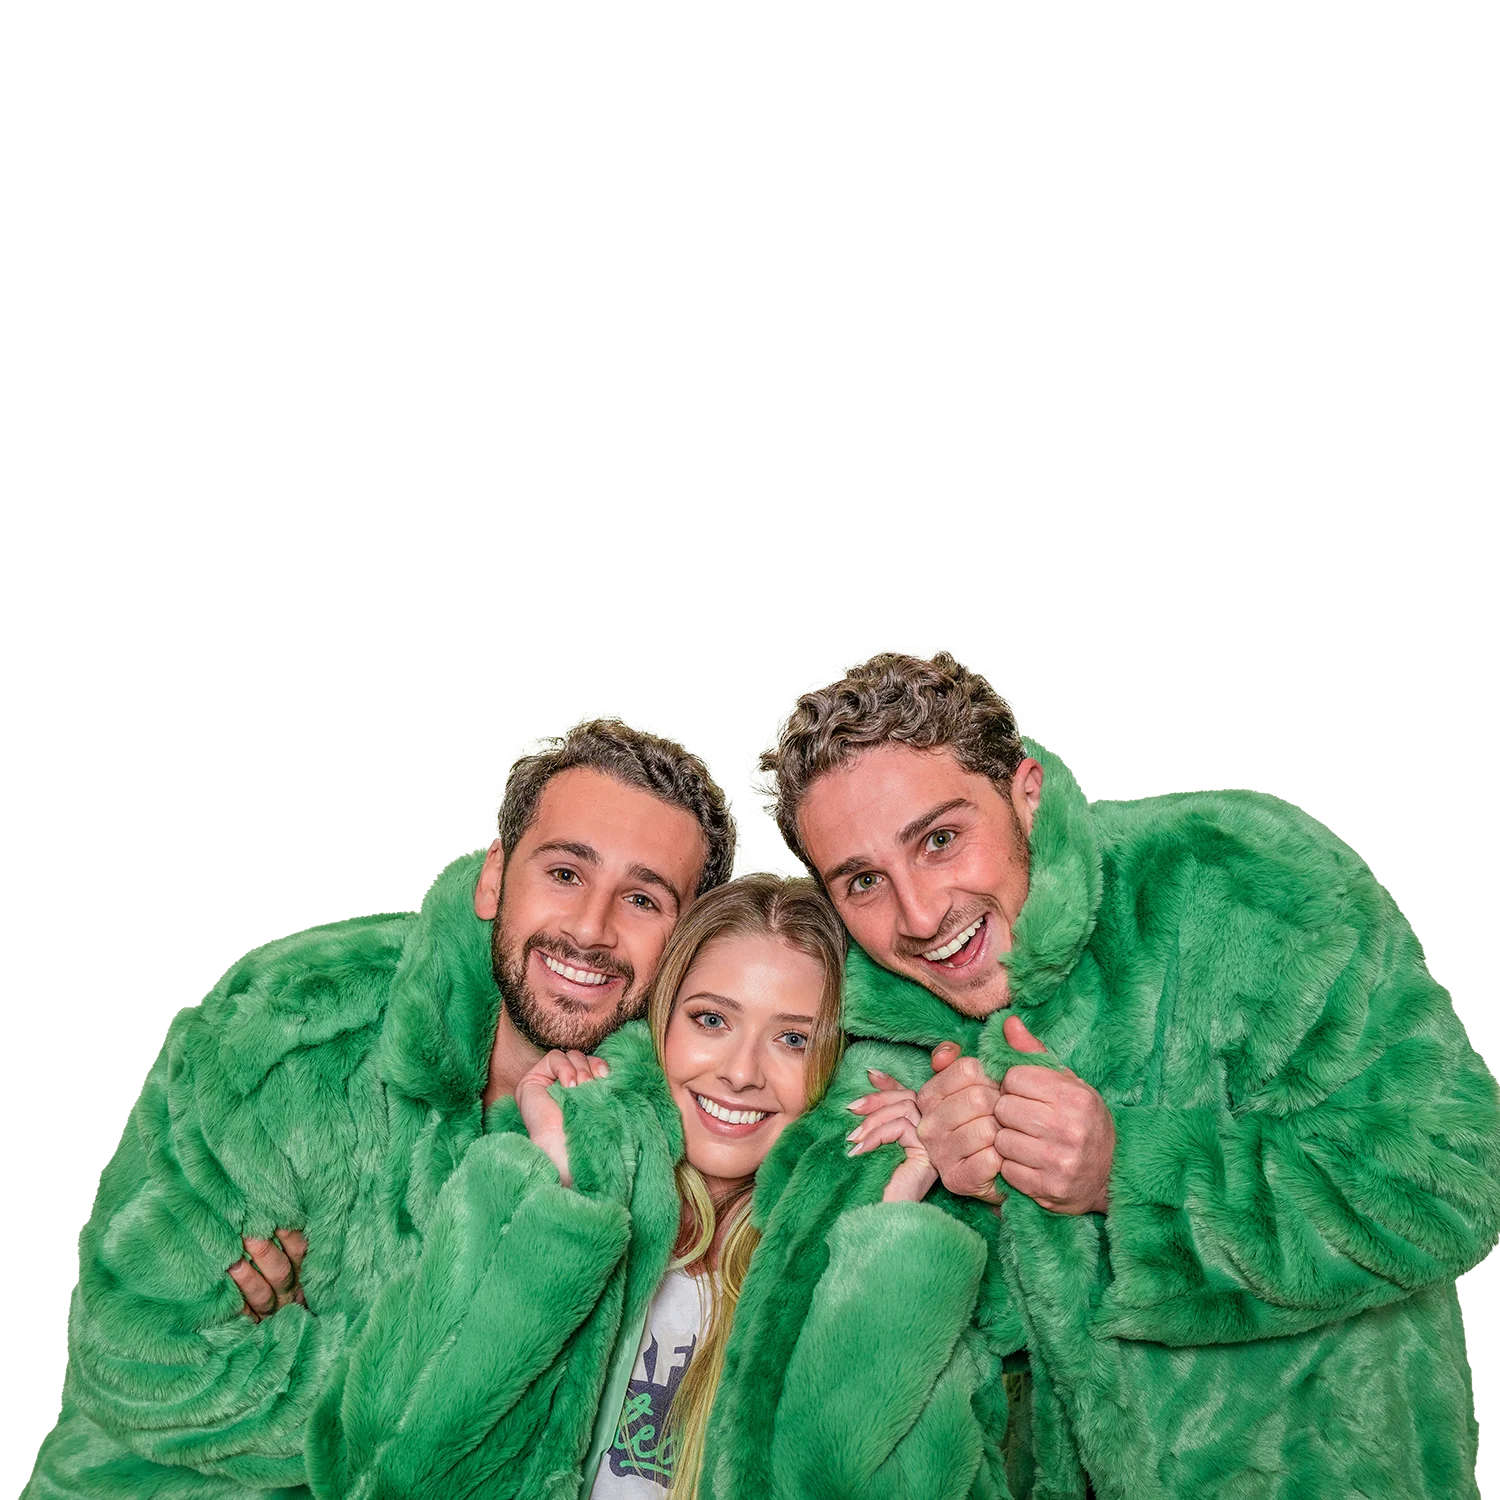 Levi, Marisa and Teddie dressed in bright green fluffy coats smiling together